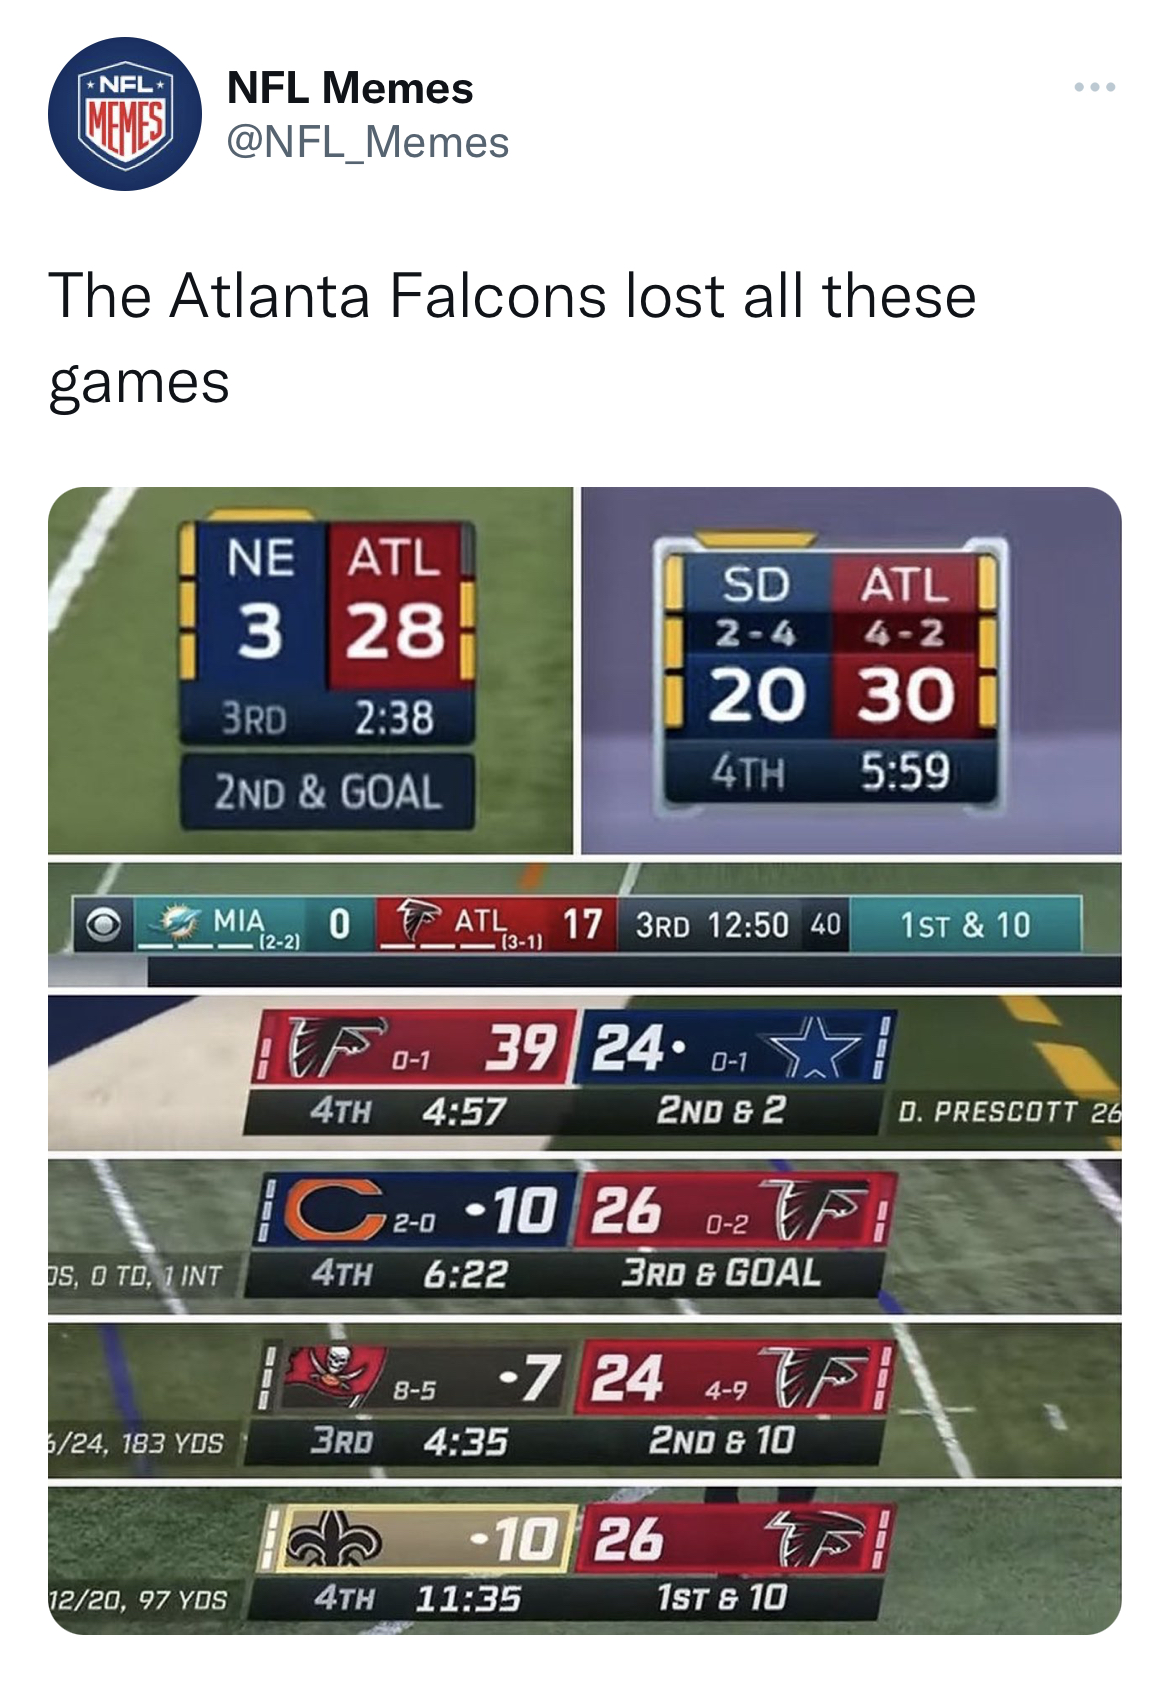 NFL memes week 1 2022 - team sport - Nfl Nfl Memes The Atlanta Falcons lost all these games Ne Atl 3 28 3RD 2ND & Goal Mia 0 1221 S. O To Int 24, 183 Yos 1220, 97 Yds 01 3RD 4TH Atl 17 3RD 40 1311 85 39 2401 C2010 26 02 4TH Sd Atl 24 42 20 30 4TH 10 2ND &